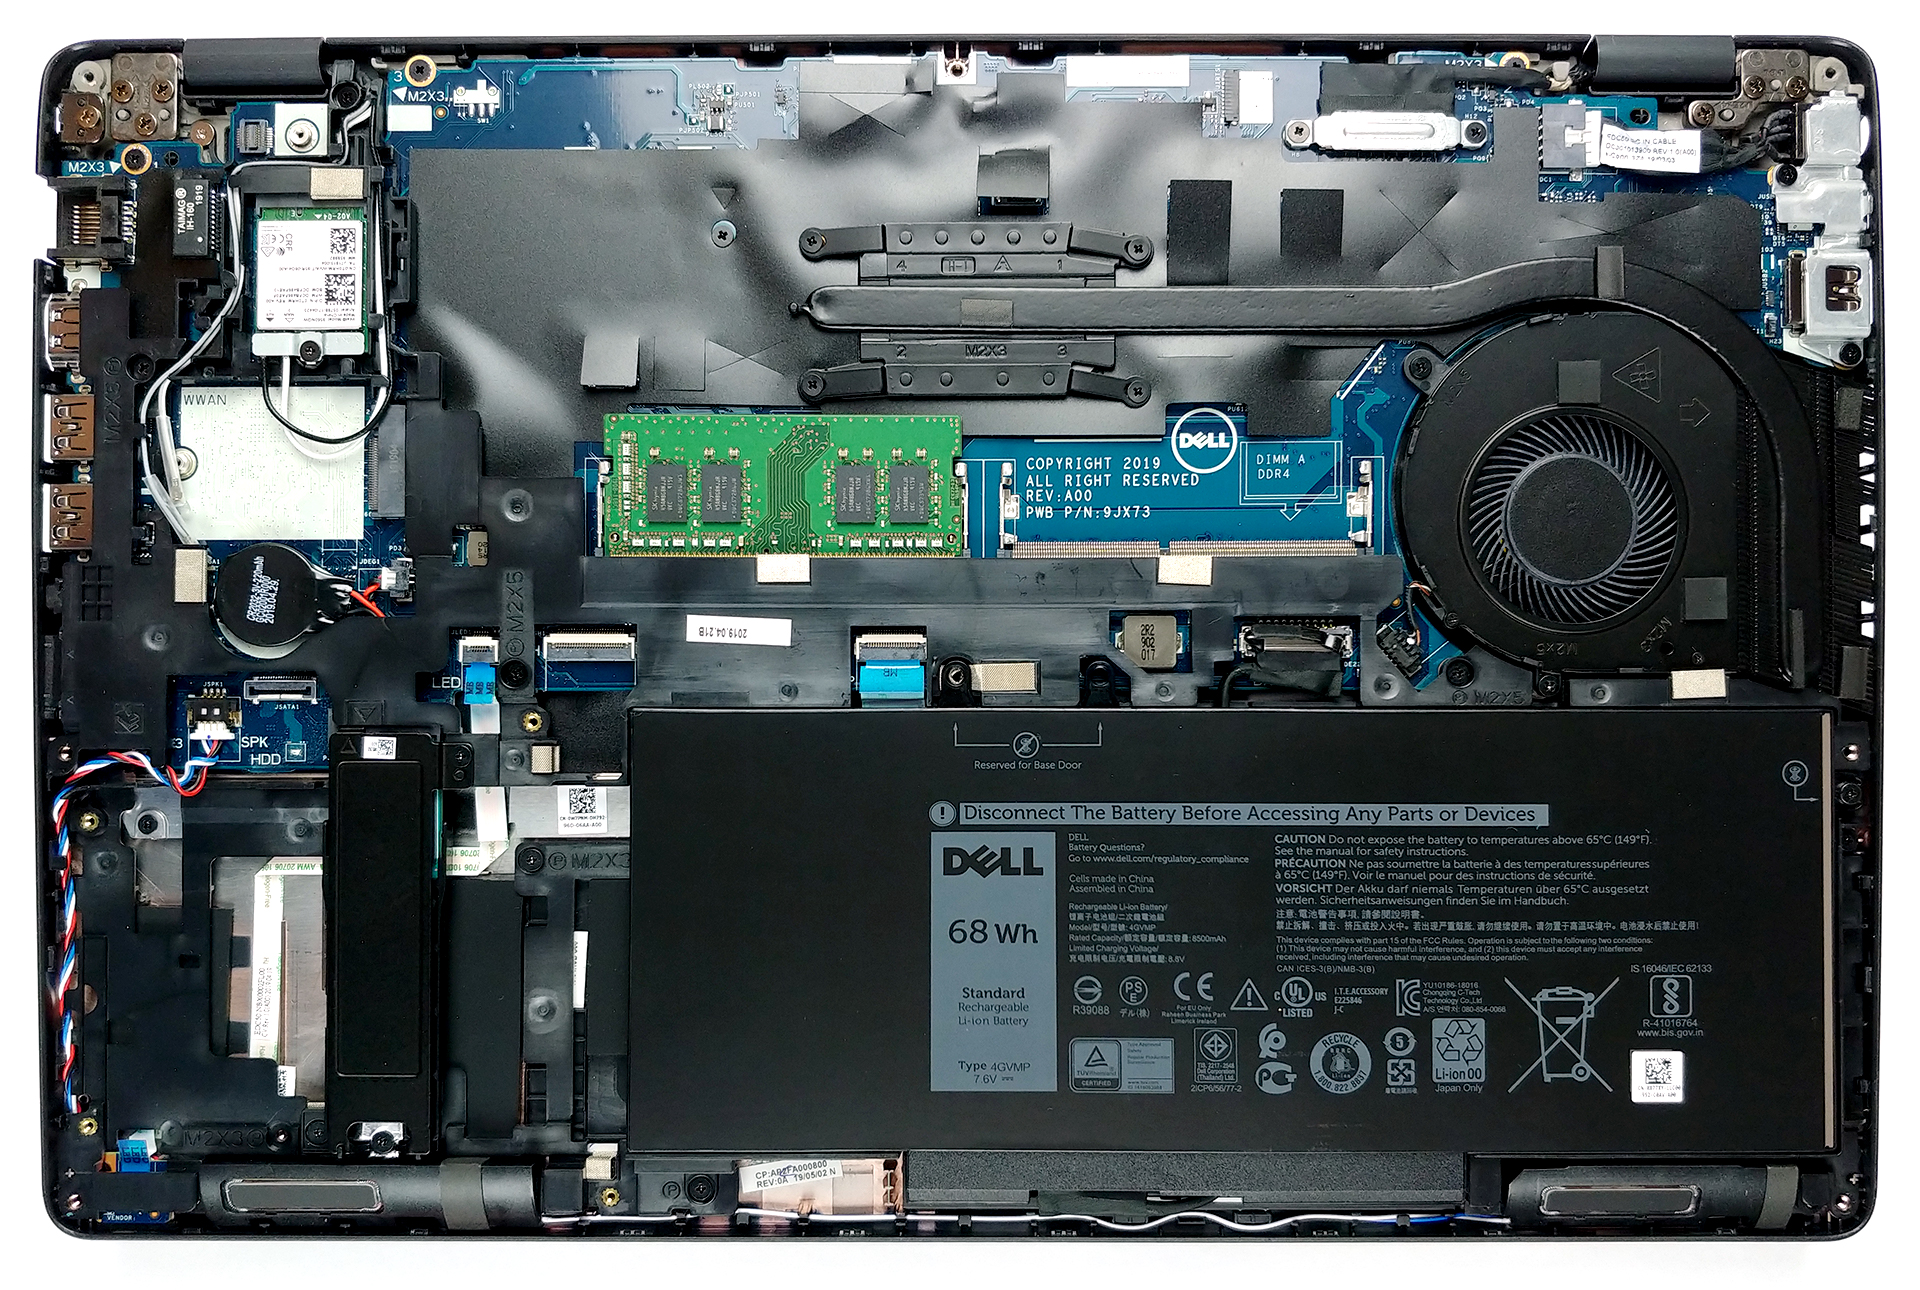 Dell Latitude 5500 review - it will certainly enhance your business  experience | LaptopMedia 中国